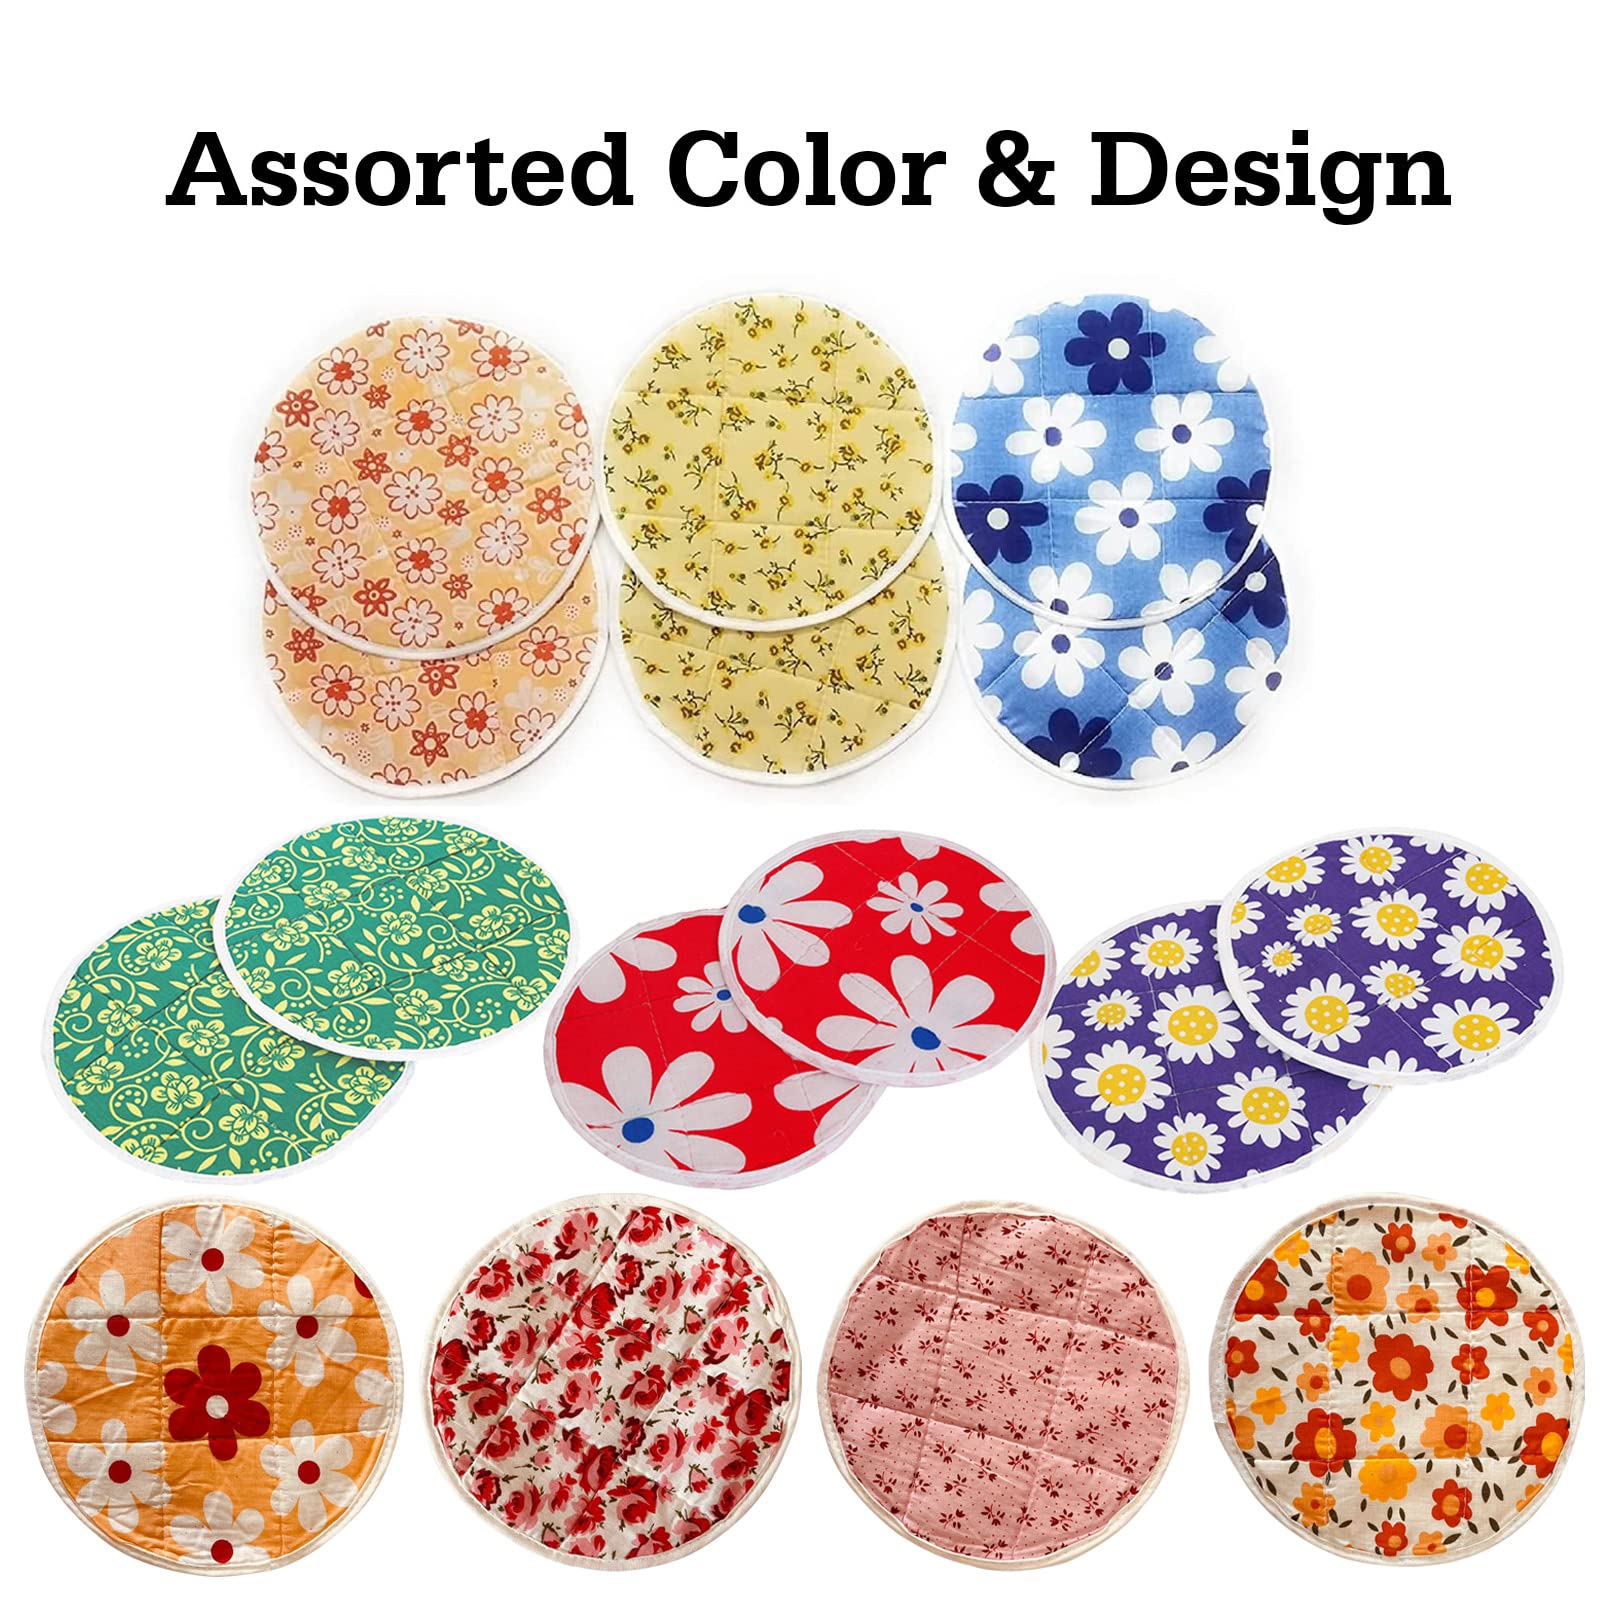 Kuber Industries Cotton 2 Pieces Roti Cover/Chapati Cover/Roti Rumals (Assorted) 1 Pc Top & 1 Pc Bottom- CTKTC32558